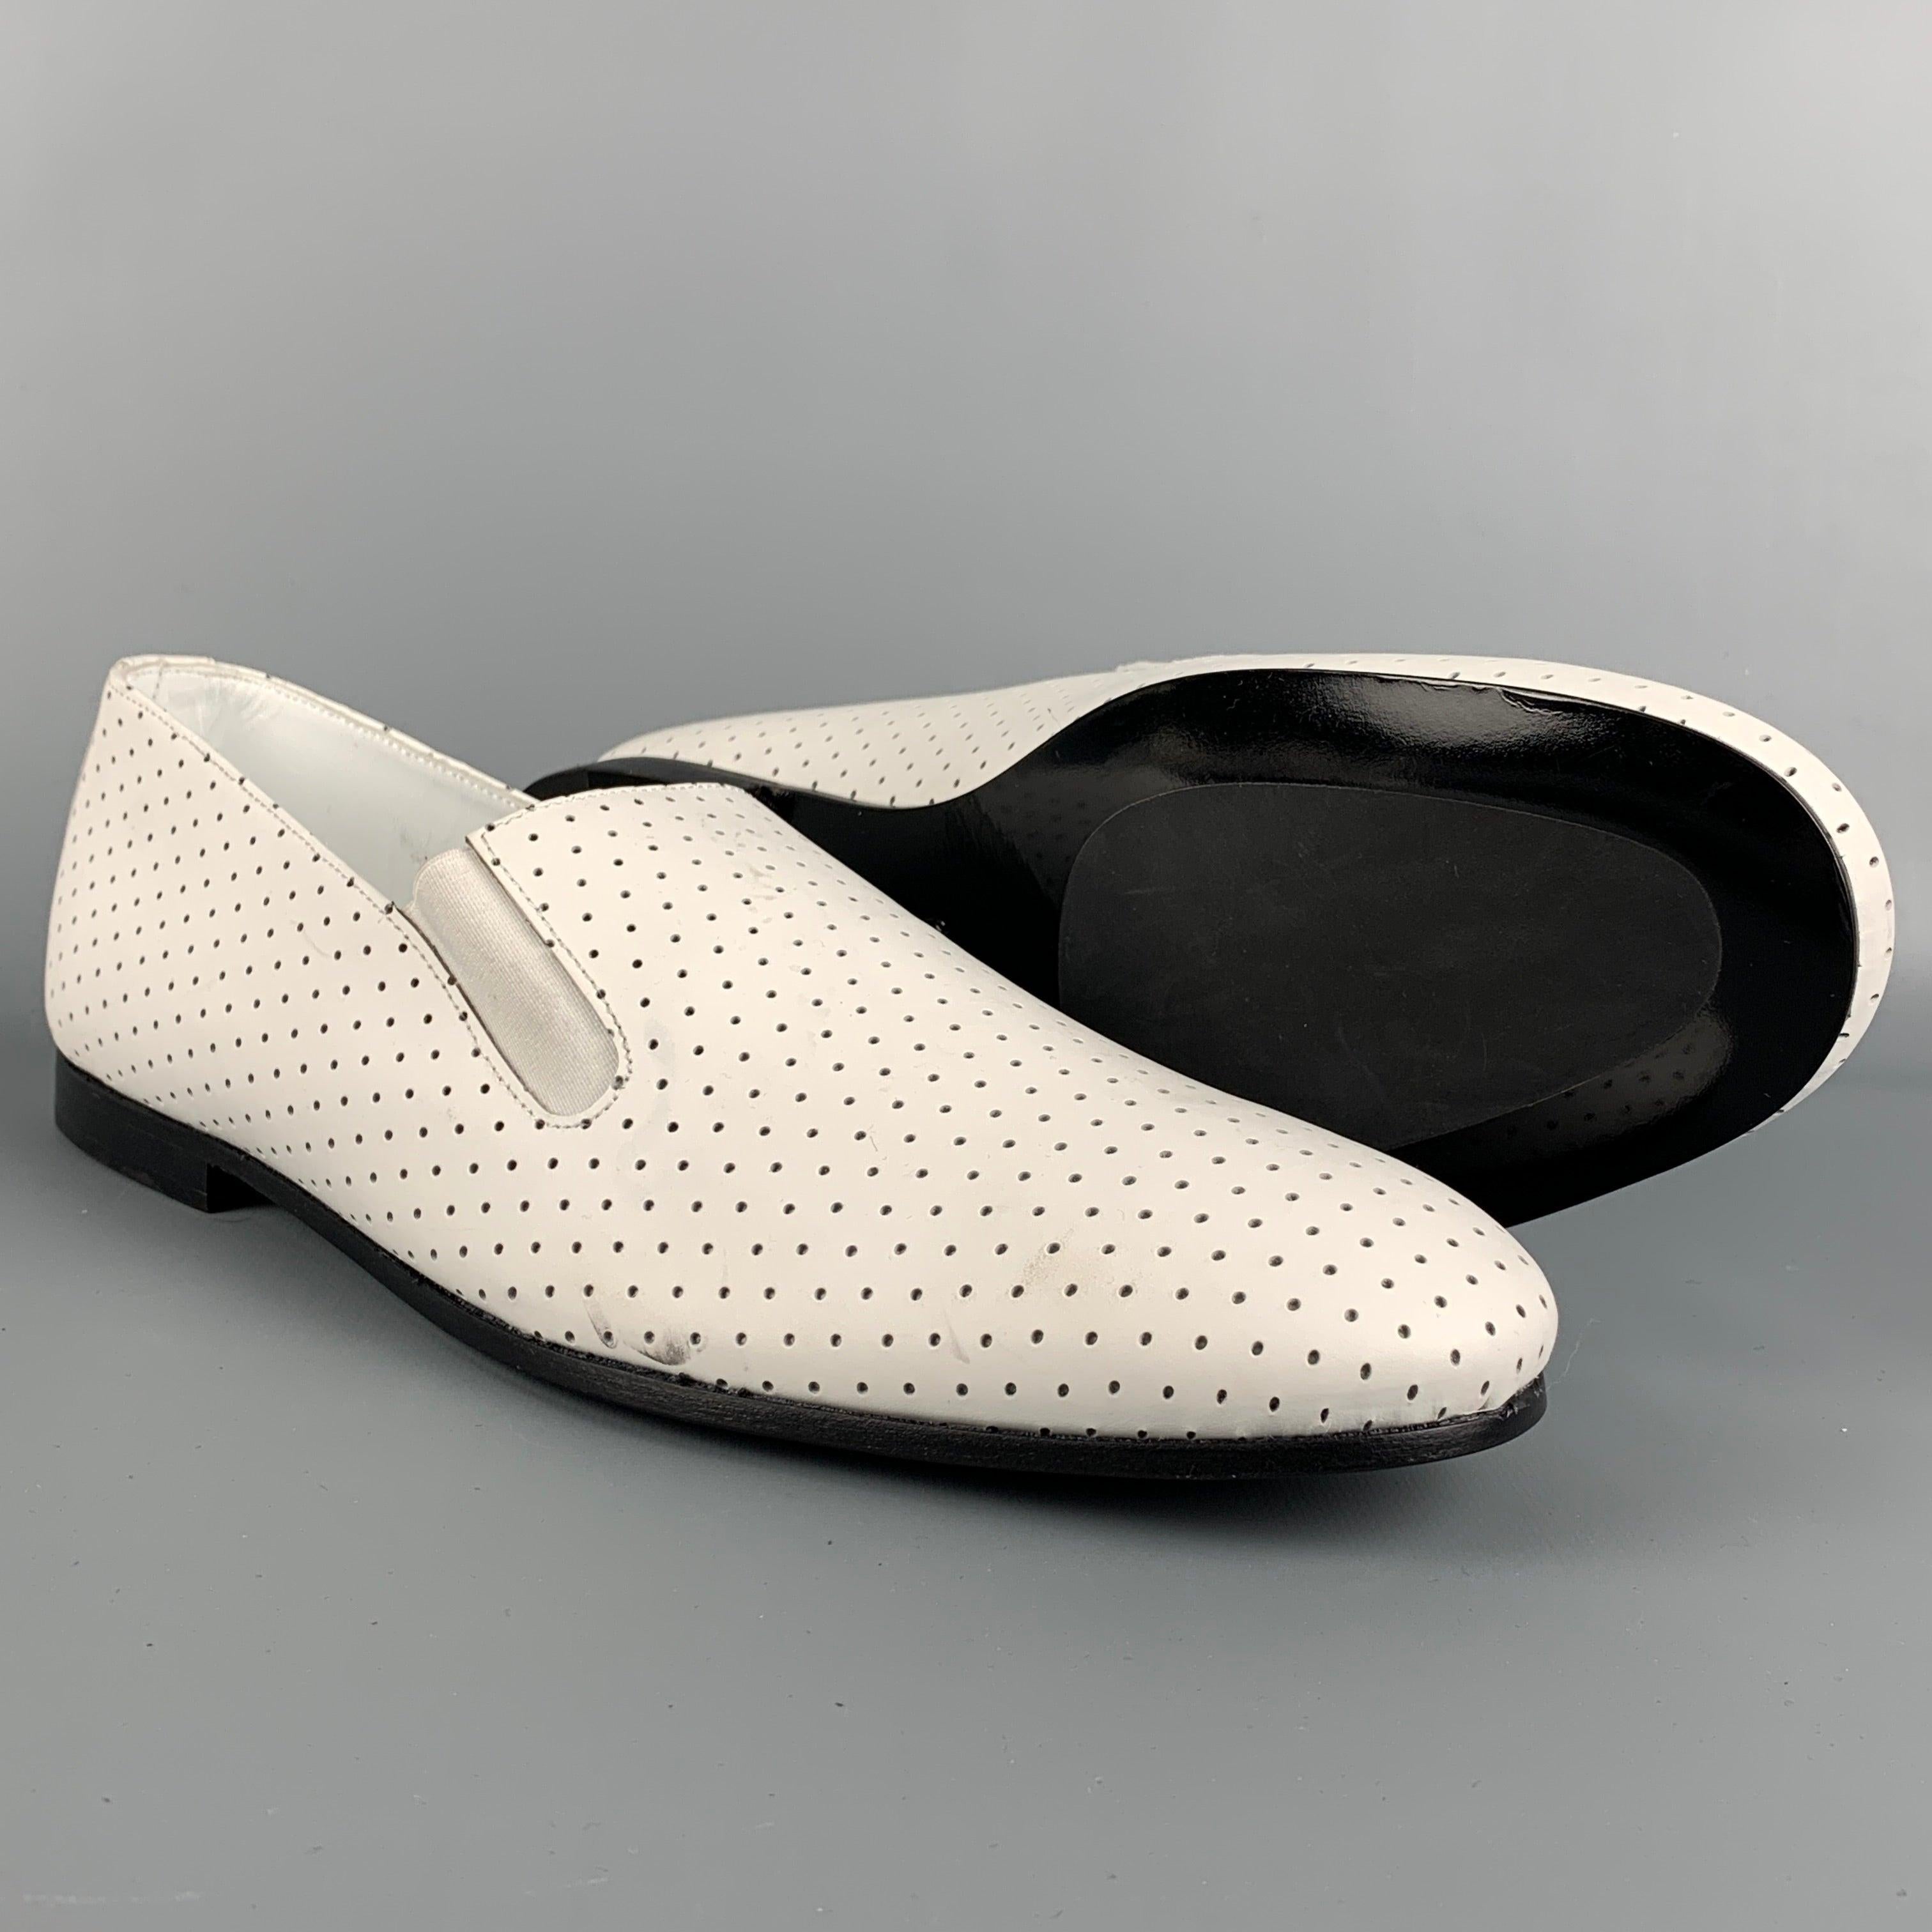 PAUL SMITH Size 10 White Perforated Leather Slip On Loafers In Good Condition For Sale In San Francisco, CA